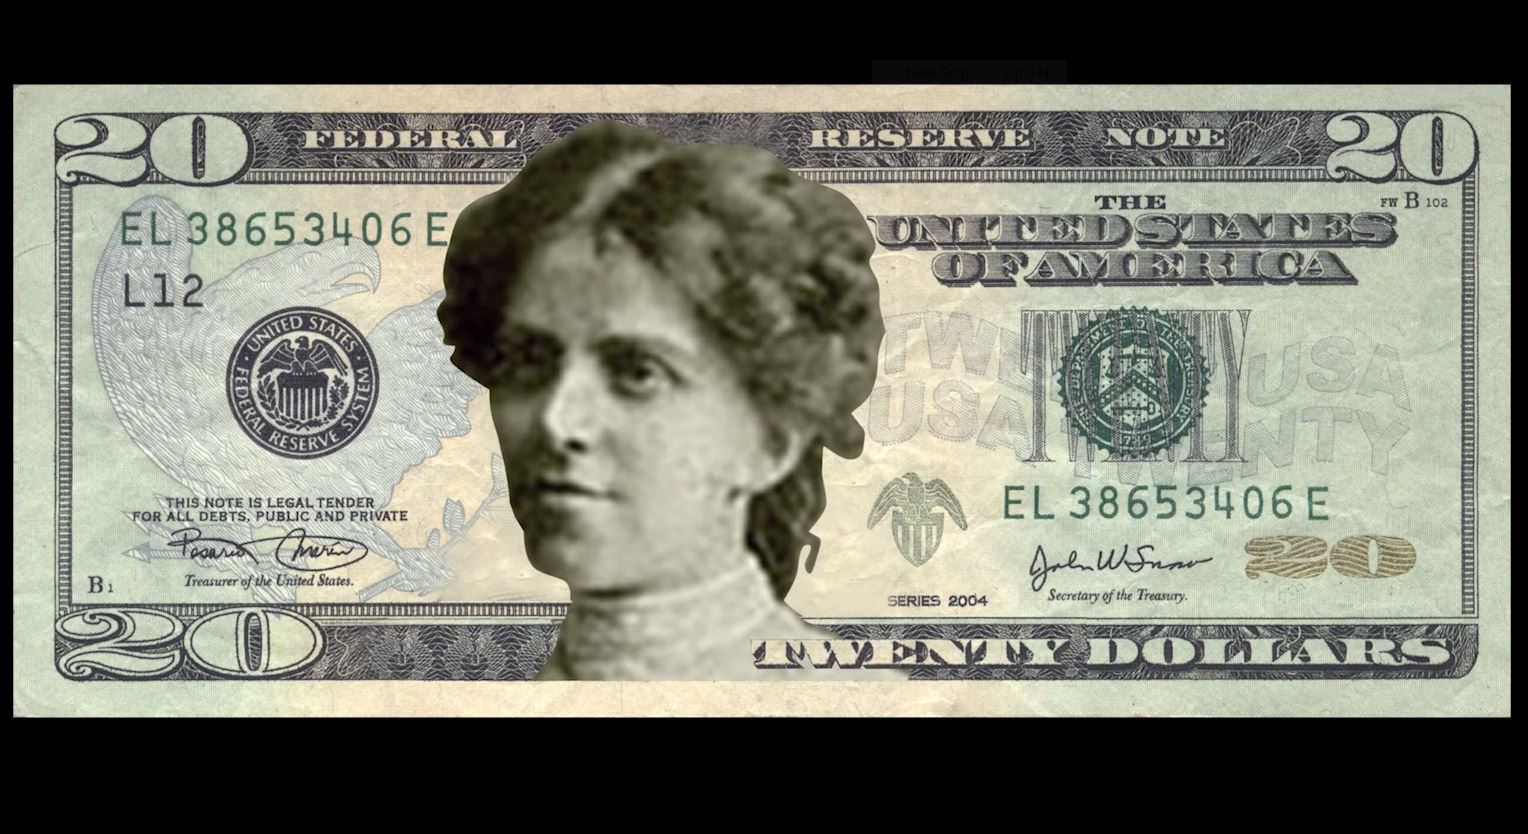 Why a woman should be on the $20 bill-—commentary